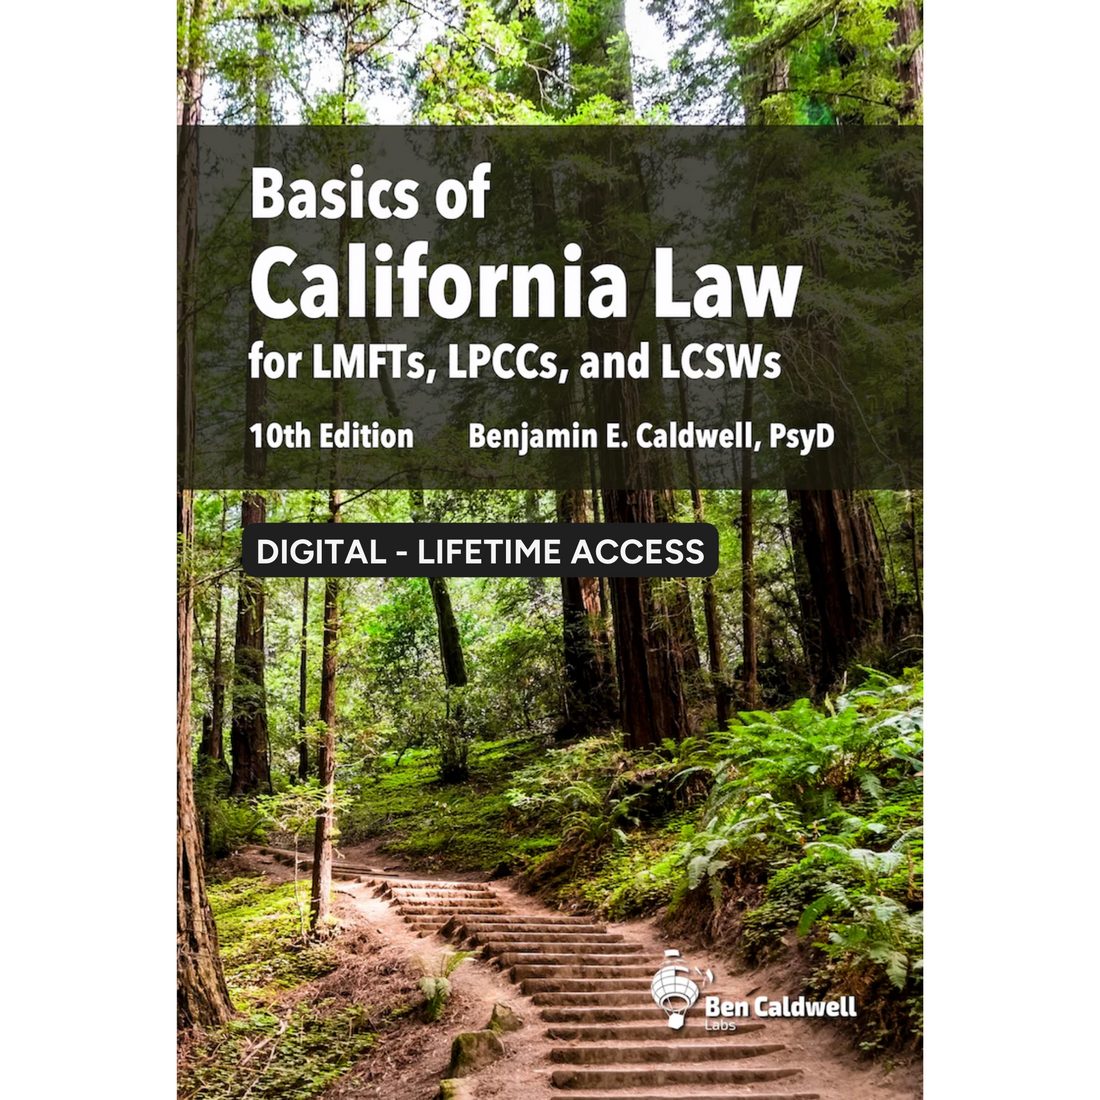 Lifetime access - Basics of California Law for LMFTs, LPCCs, and LCSWs, 10th ed digital